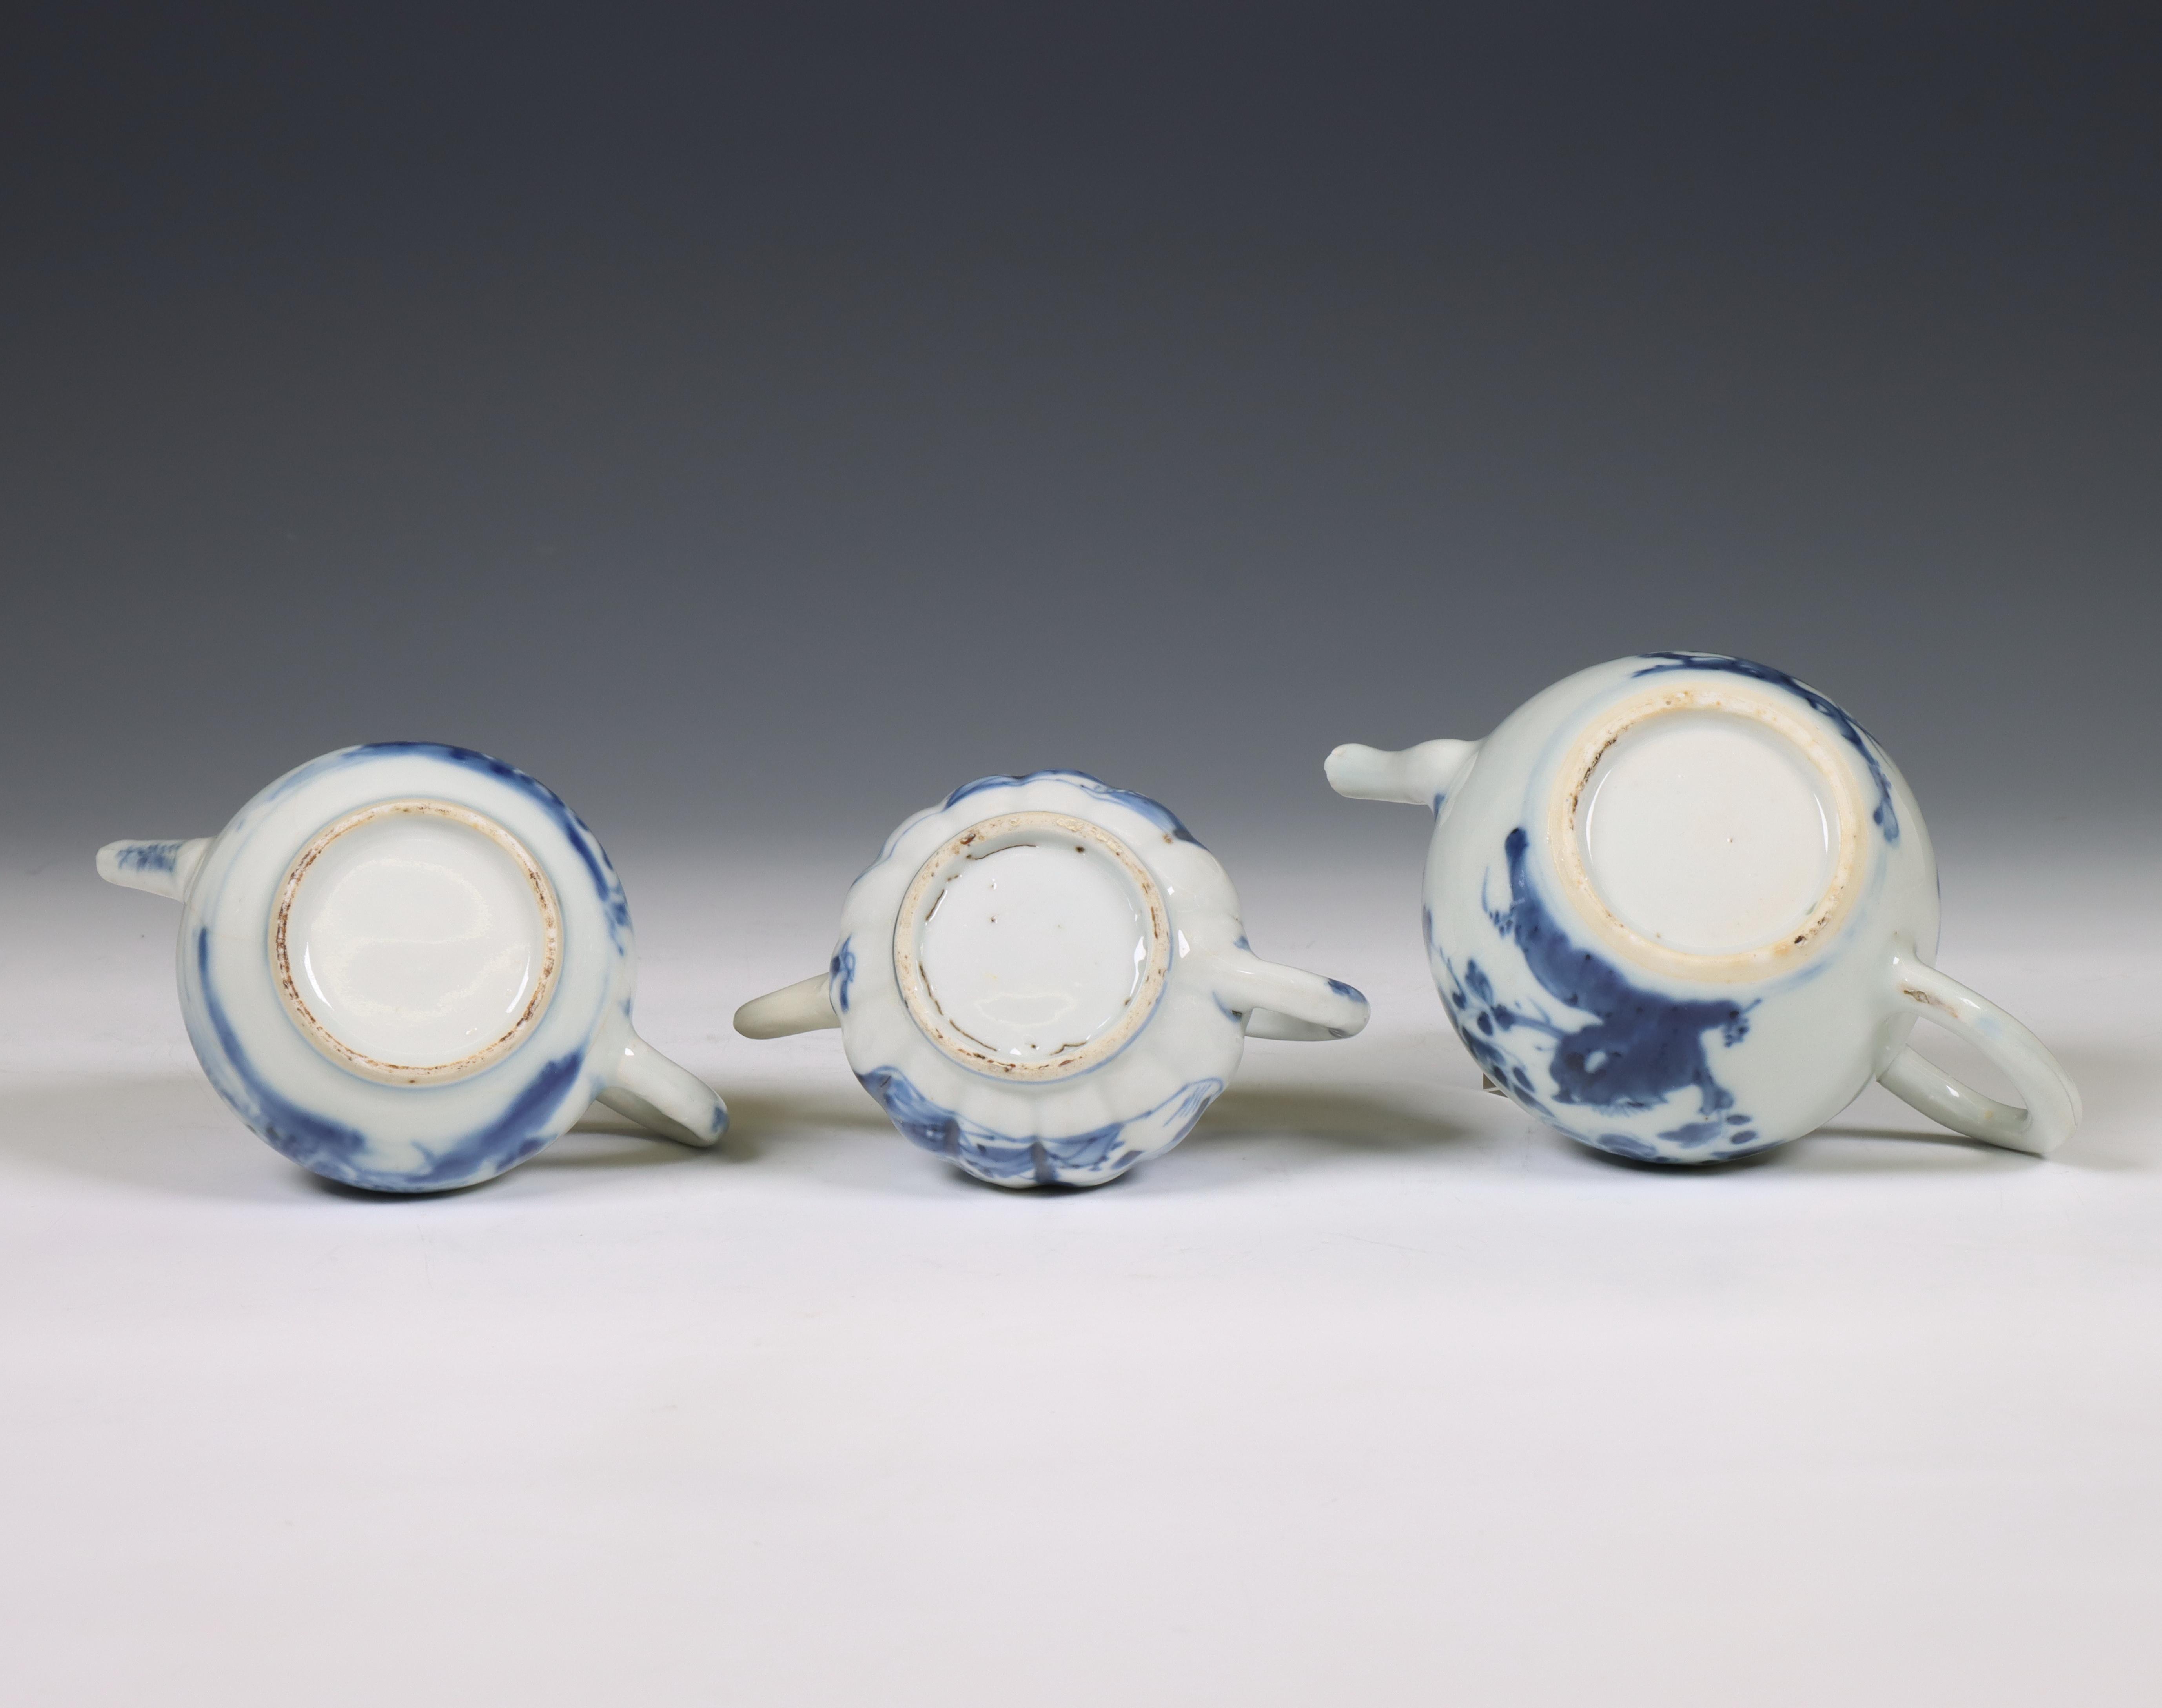 China, three blue and white porcelain teapots, 18th century, - Image 5 of 6